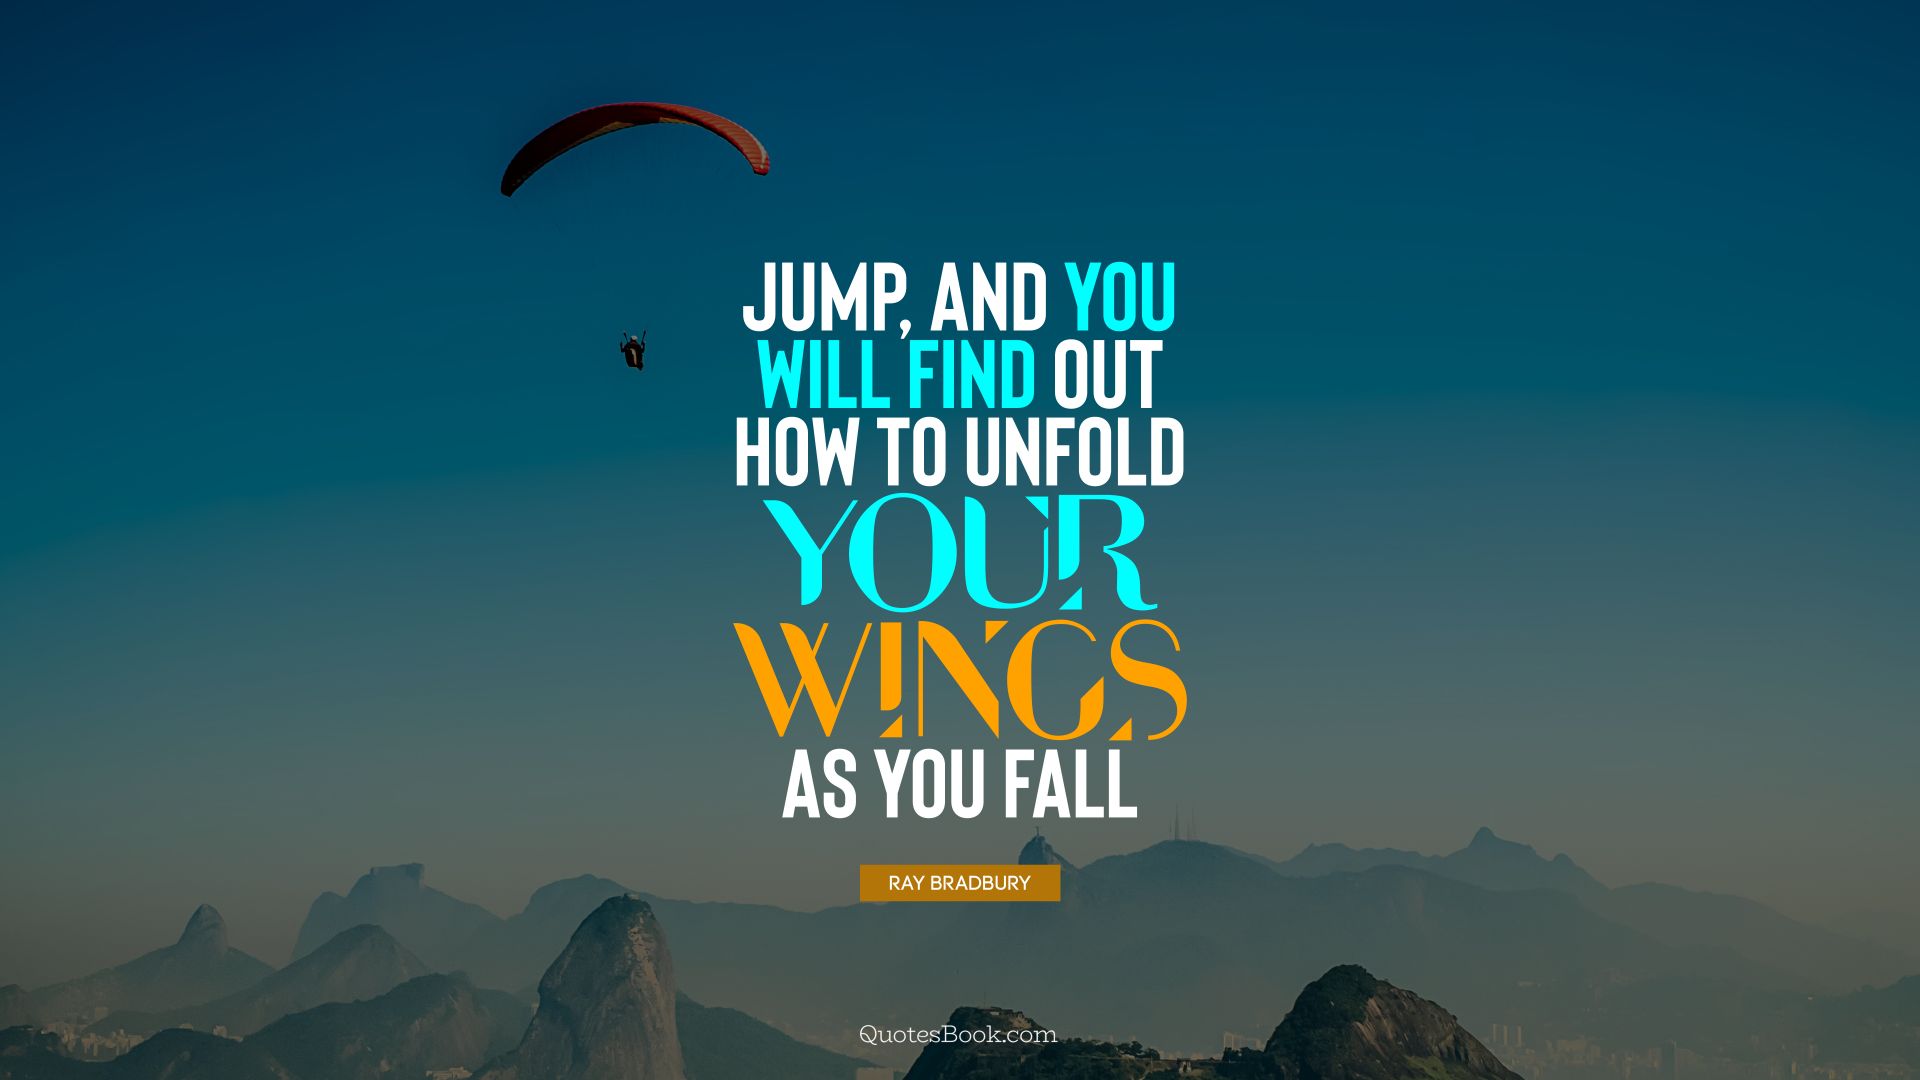 Jump, and you will find out how to unfold your wings as you fall. - Quote by Ray Bradbury